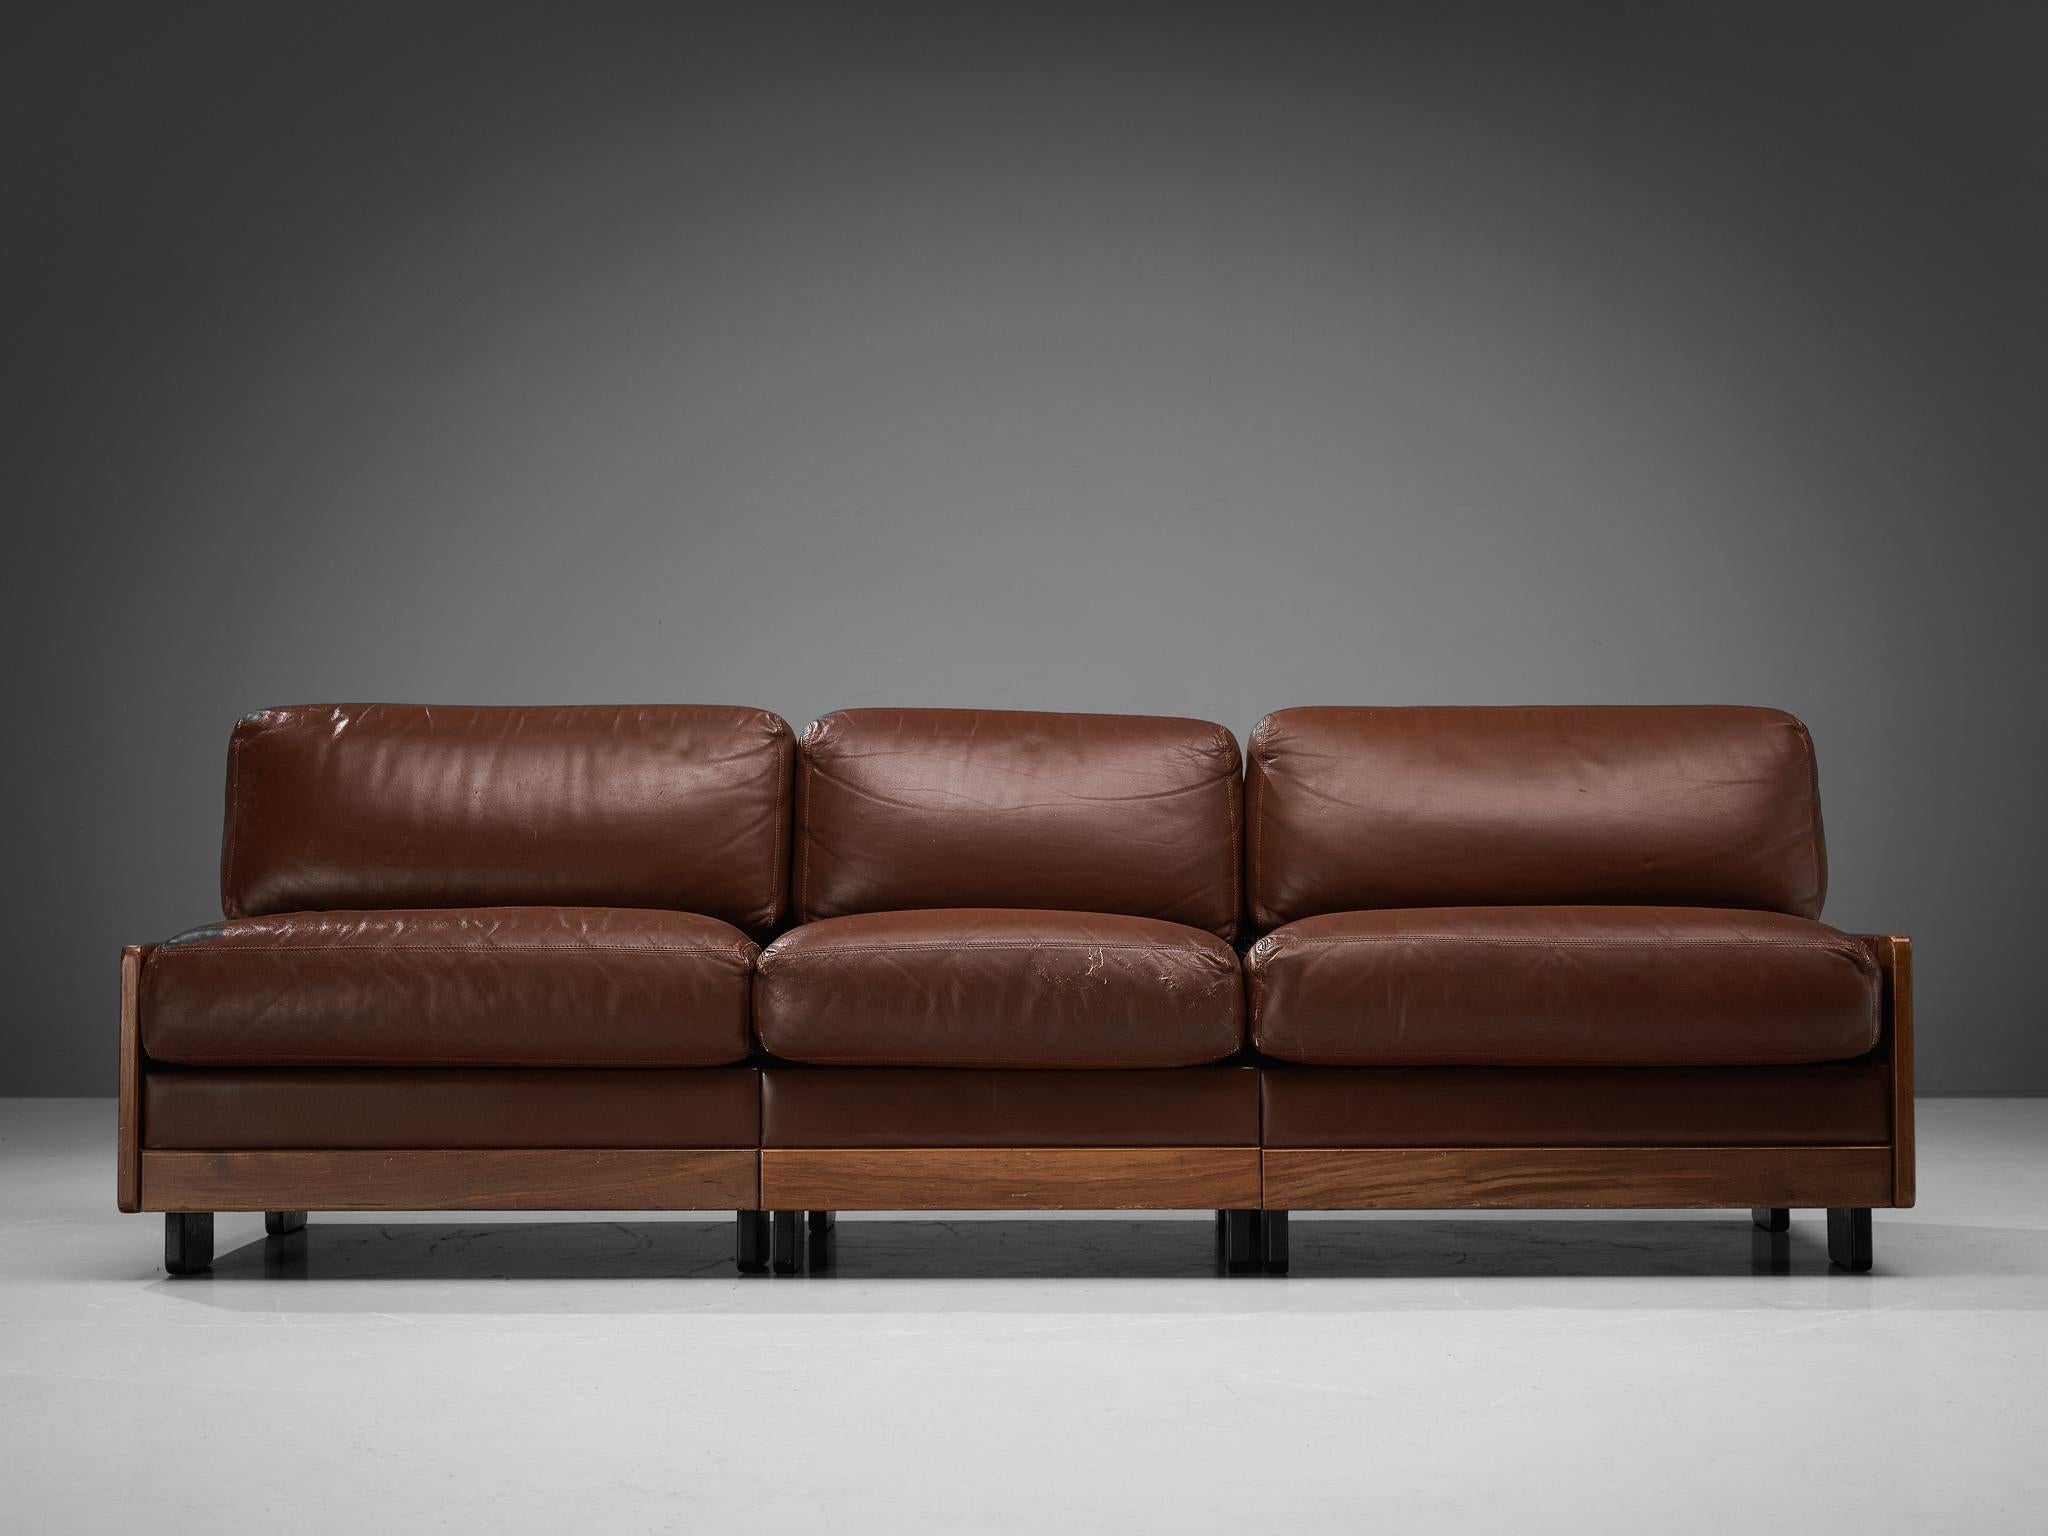 Italian Afra & Tobia Scarpa for Cassina Sofa in Walnut and Brown Leather  For Sale